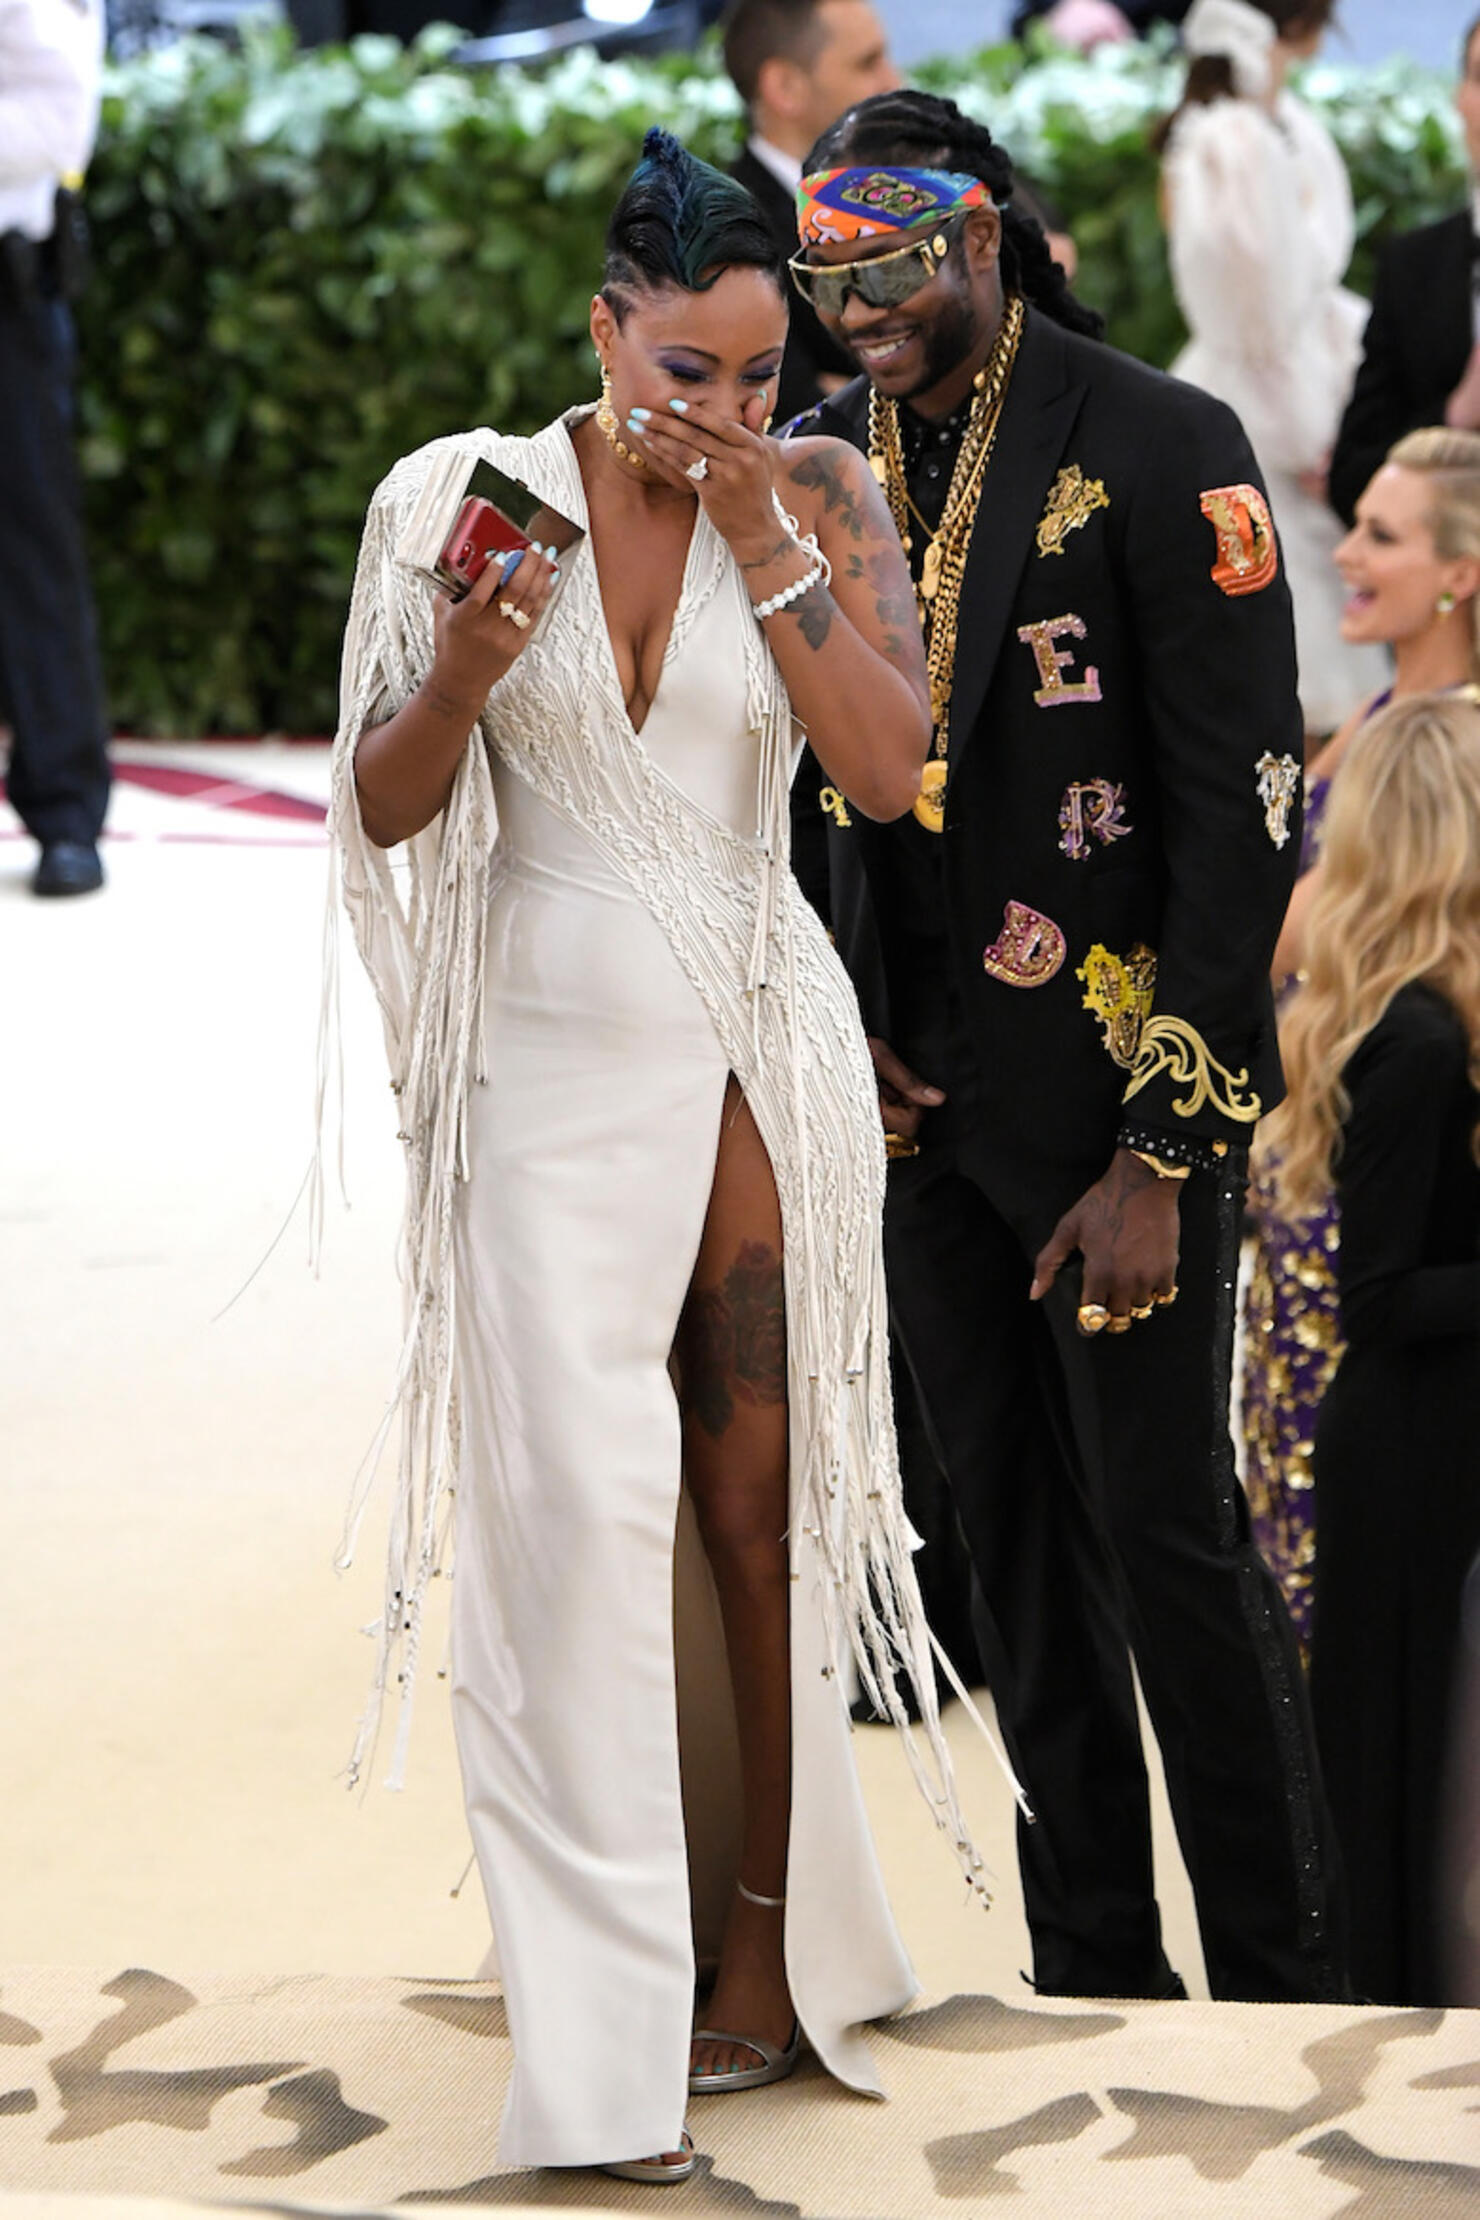 2 Chainz Gets engaged to longtime girlfriend Kesha Ward at the Met Gala